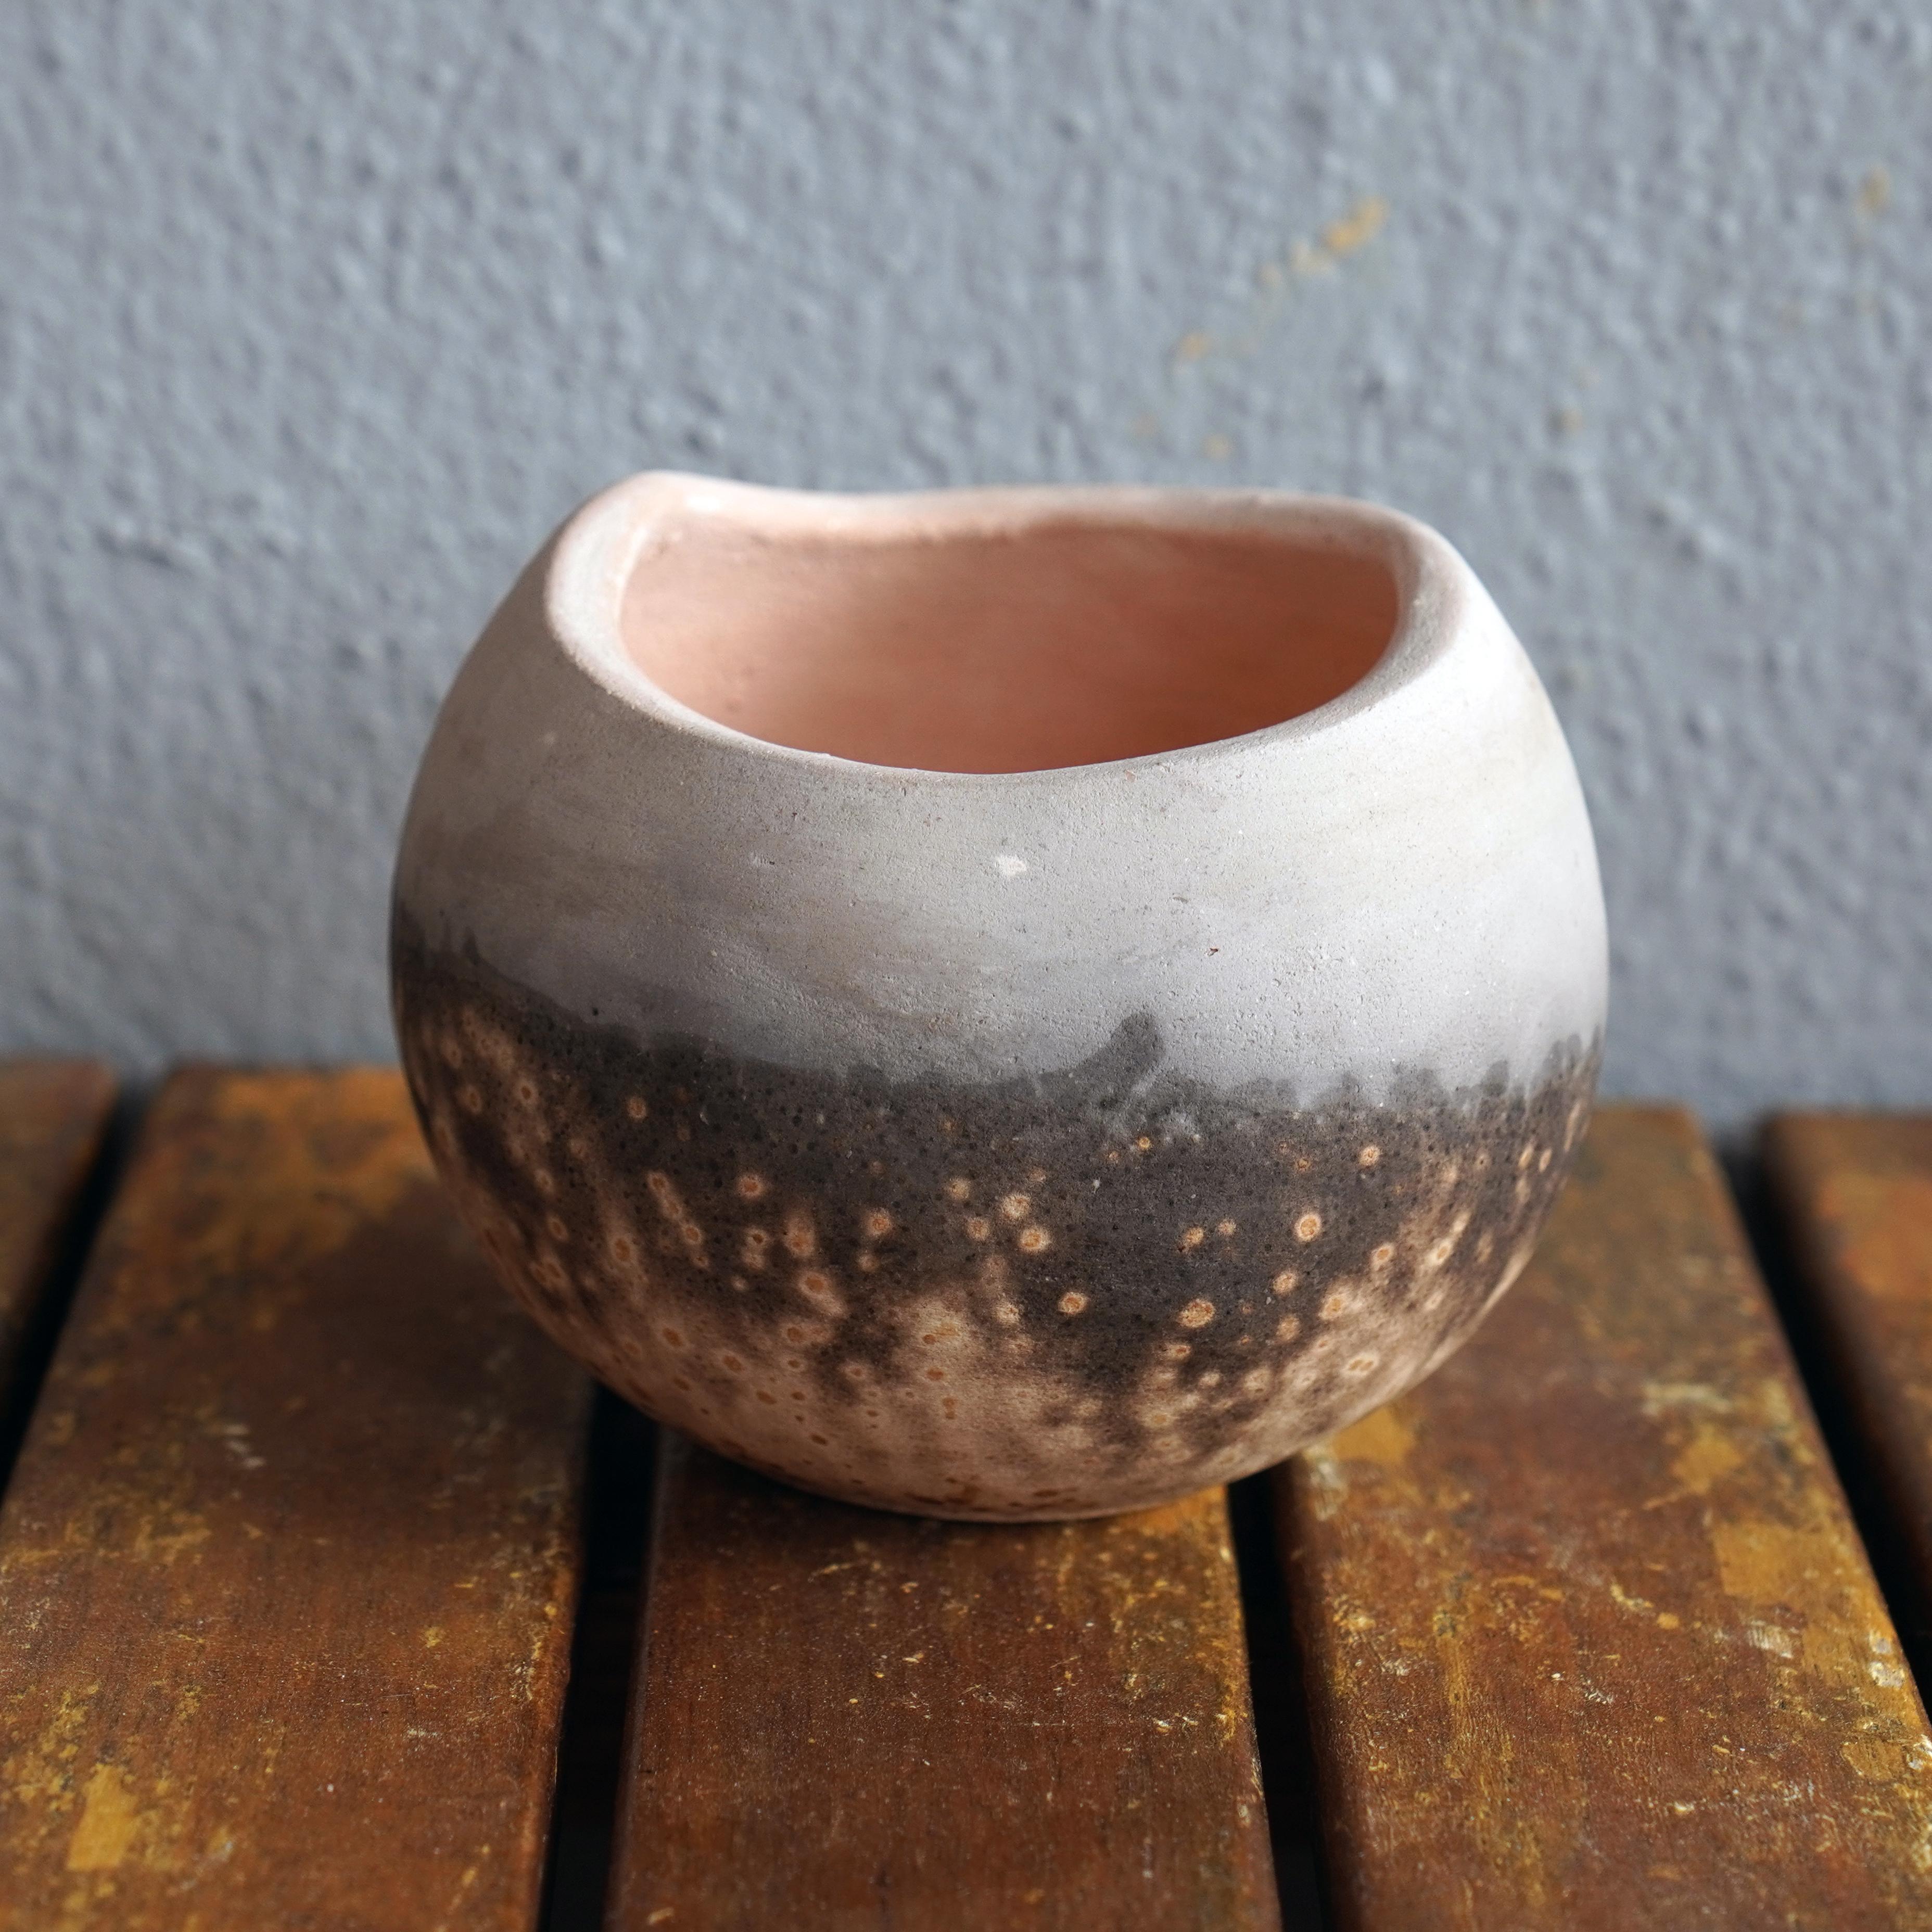 Hikari ( 光 ) ~  (n) light

This Hikari Vase is a circular thrown vase with a wide uneven mouth and small round base. Its miniature shape exudes a sense of flow, making it easy to blend into any décor style.

It could be used as a decorative piece on